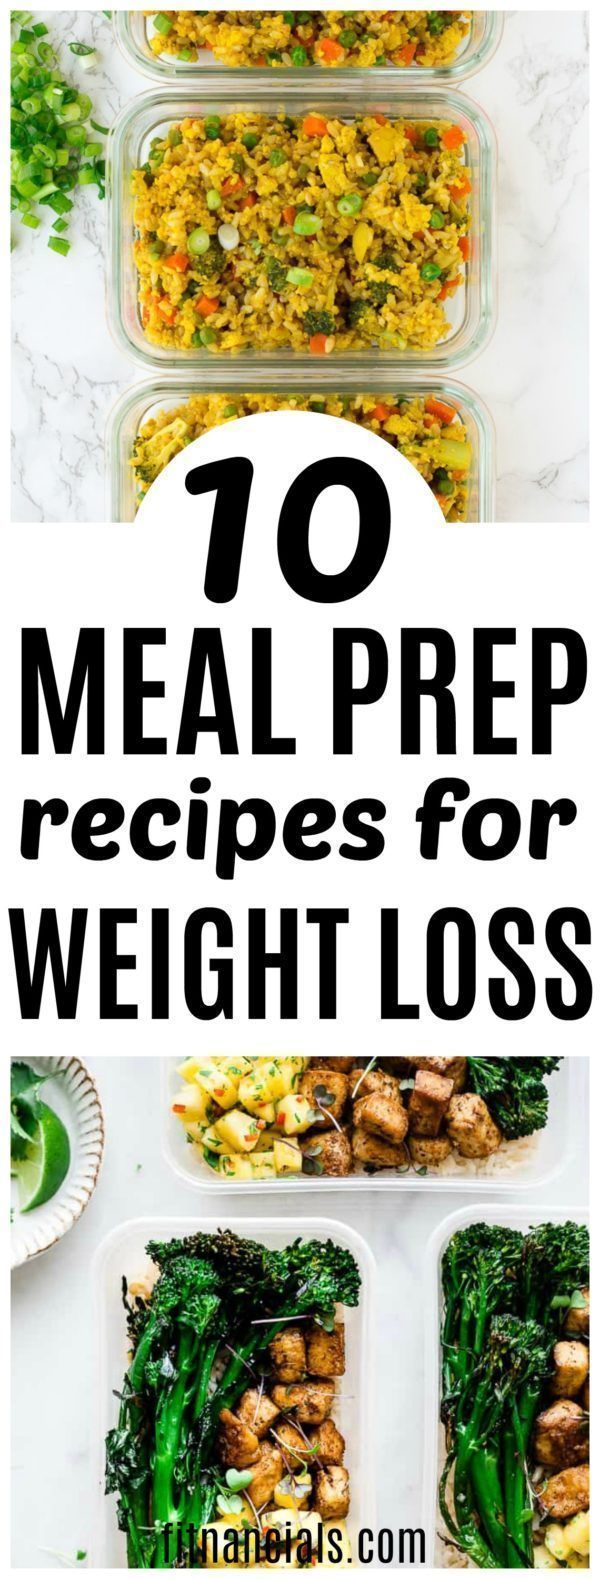 10+ Meal Prep Recipes For Weight Loss - 10+ Meal Prep Recipes For Weight Loss -   19 meal prep recipes for weight loss cheap ideas